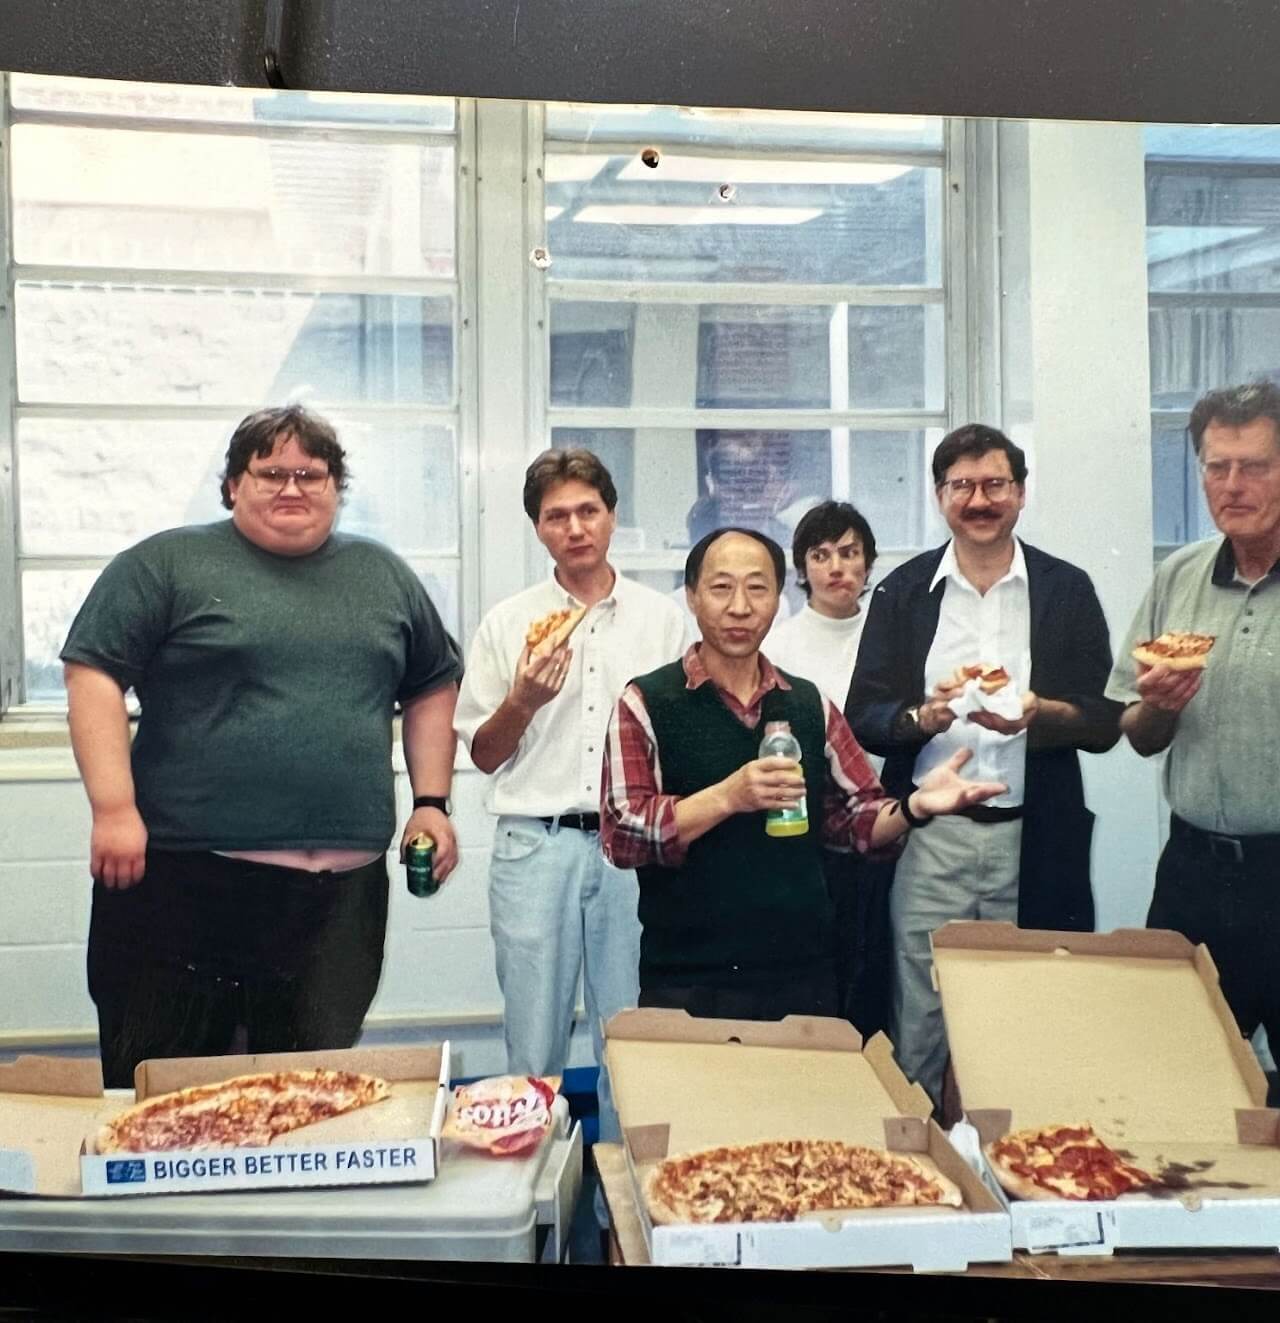 group of people posing next to pizzas indoors